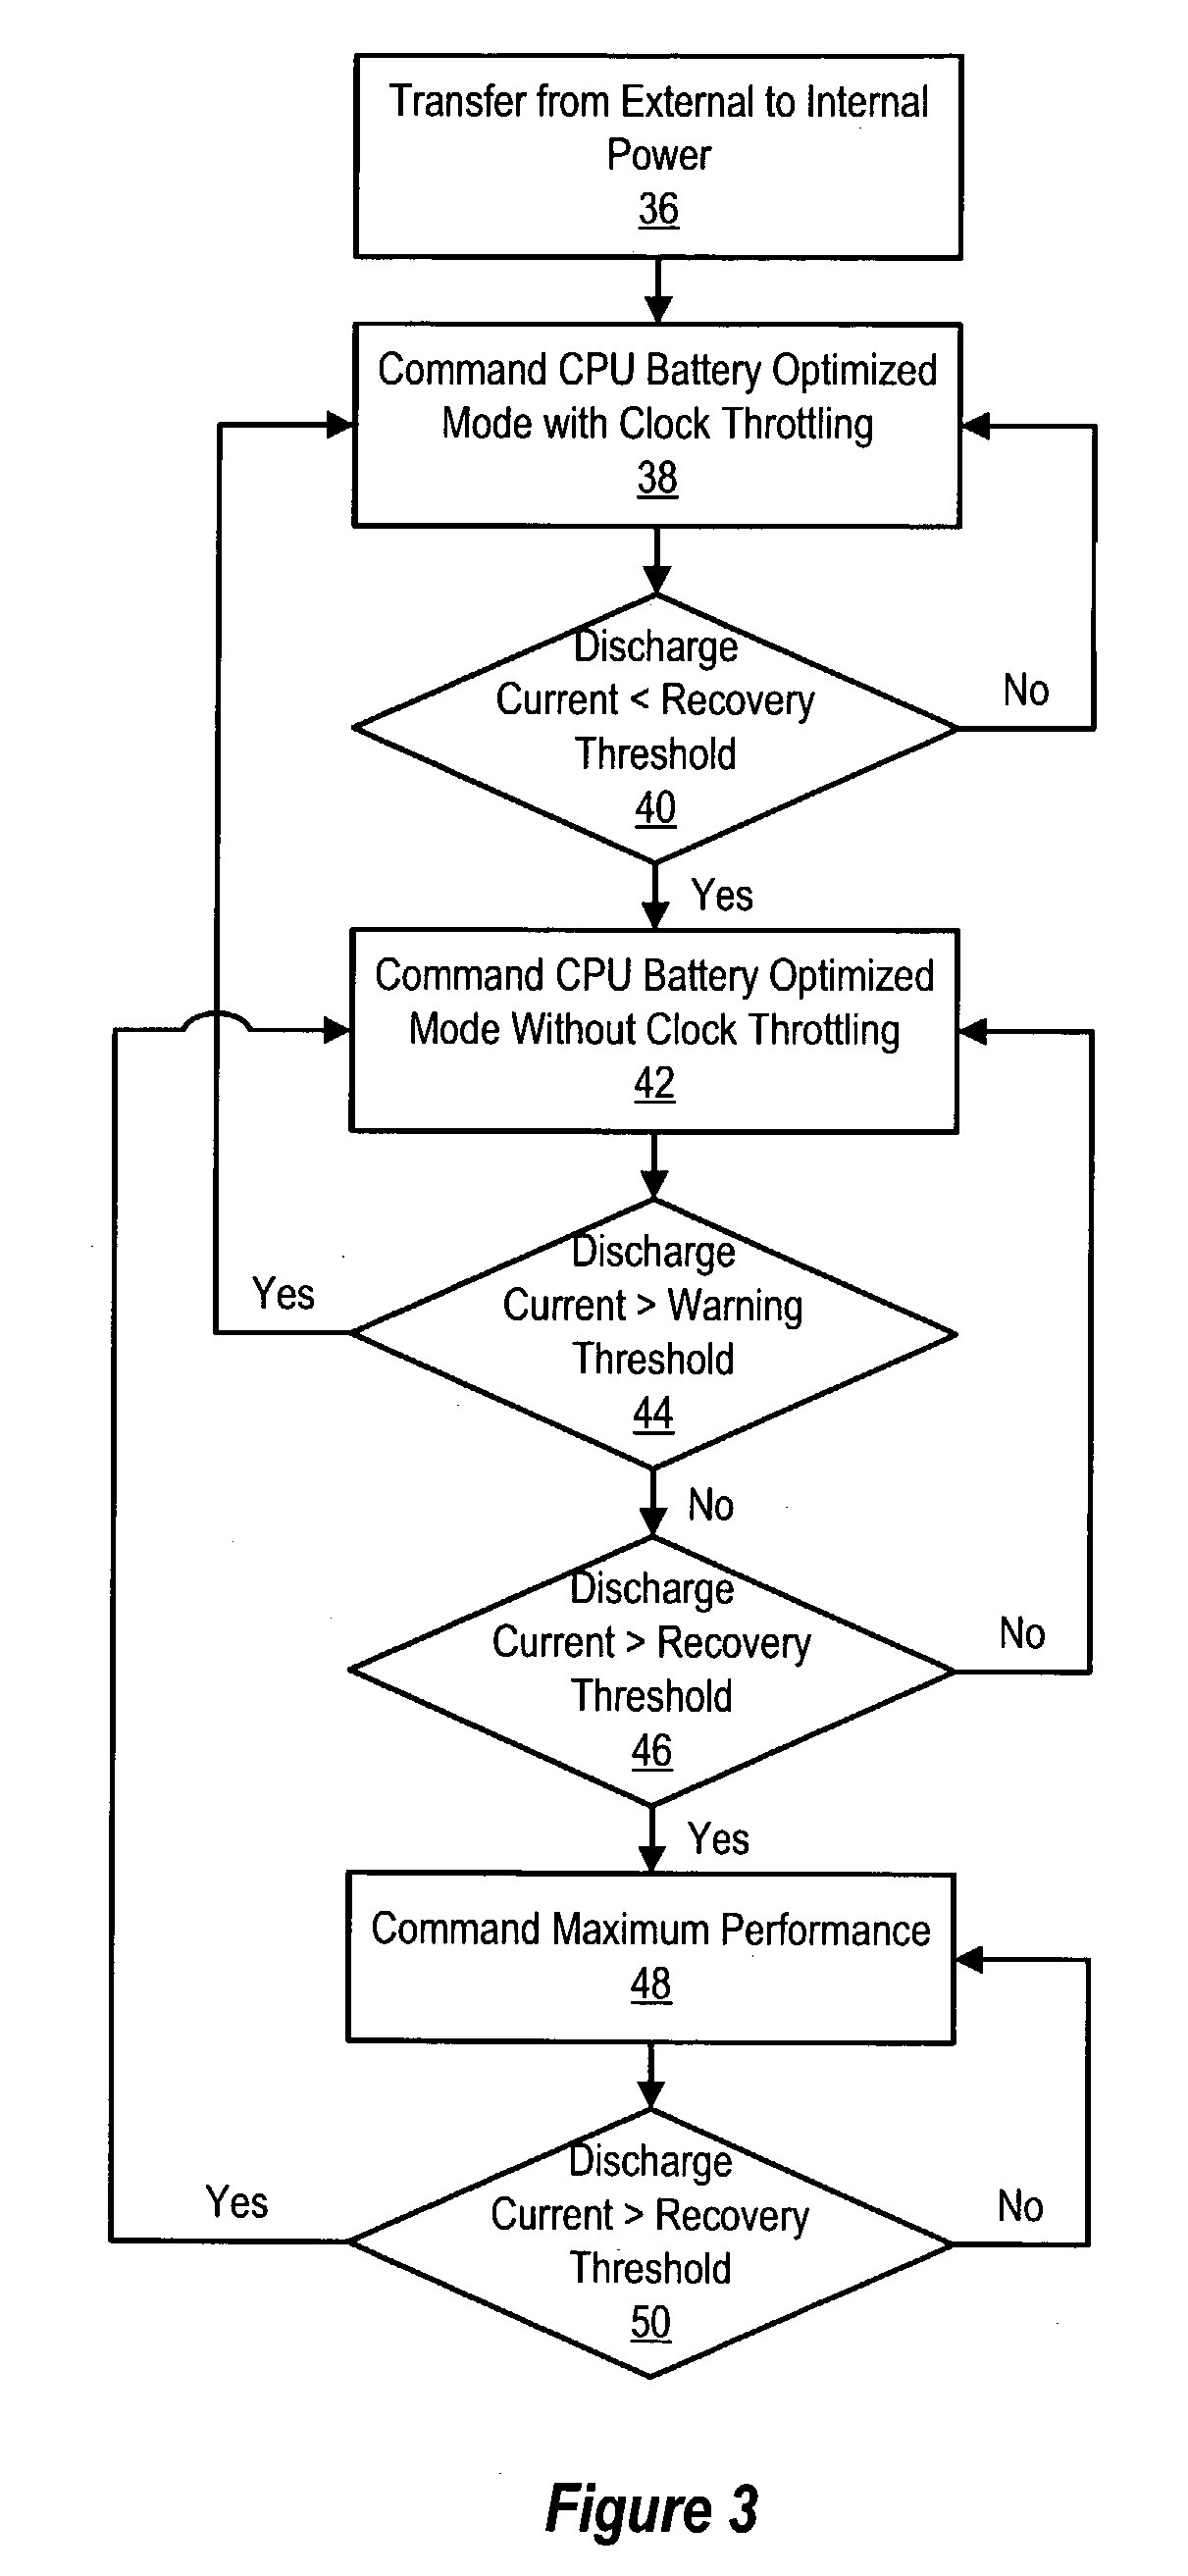 Method and system for dynamically adjusting power consumption of an information handling system